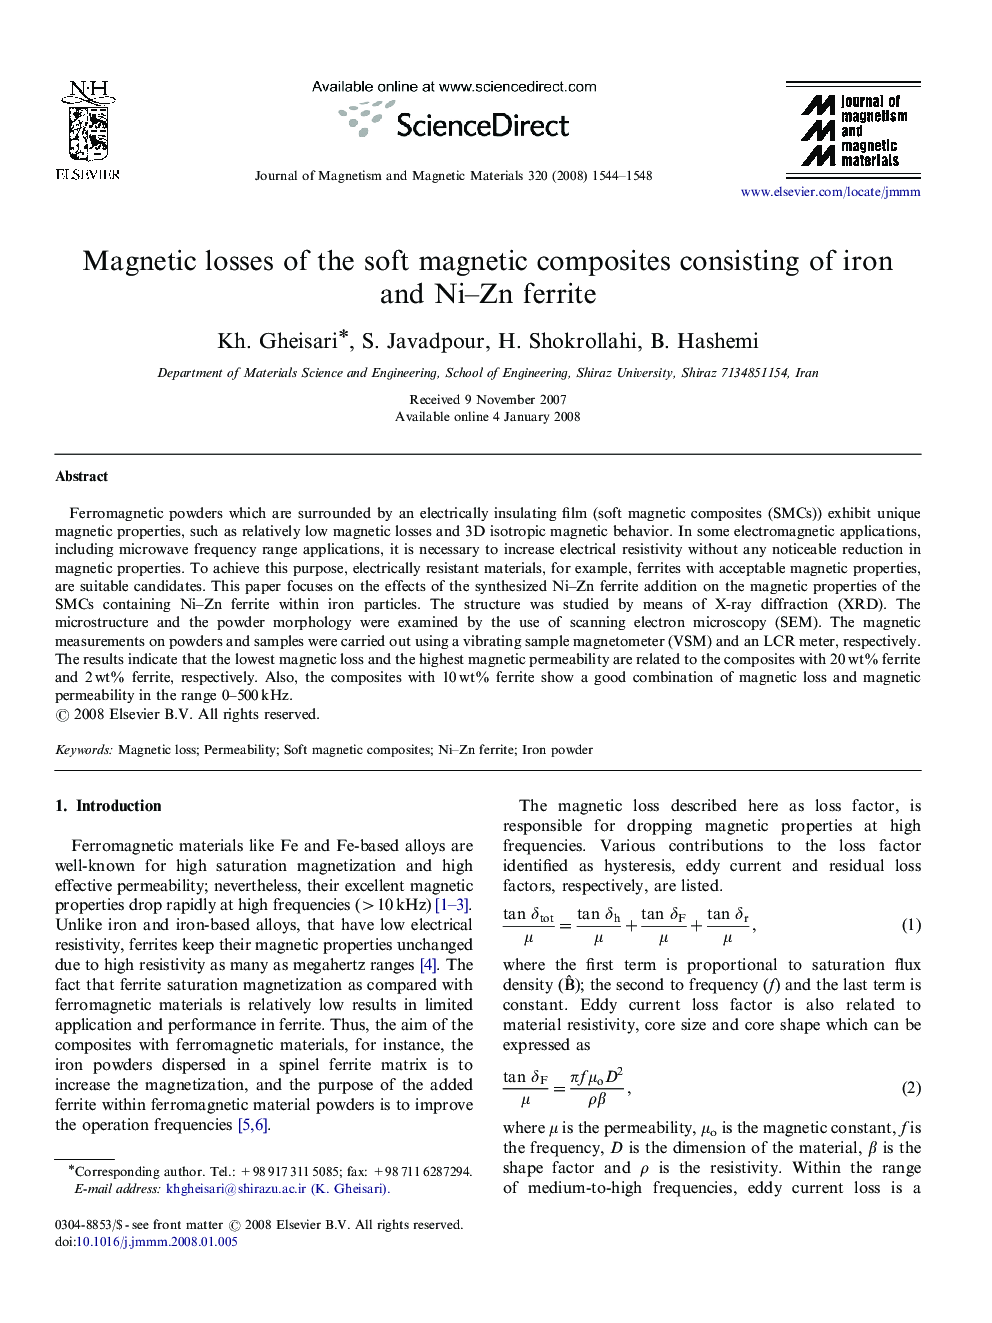 Magnetic losses of the soft magnetic composites consisting of iron and Ni–Zn ferrite